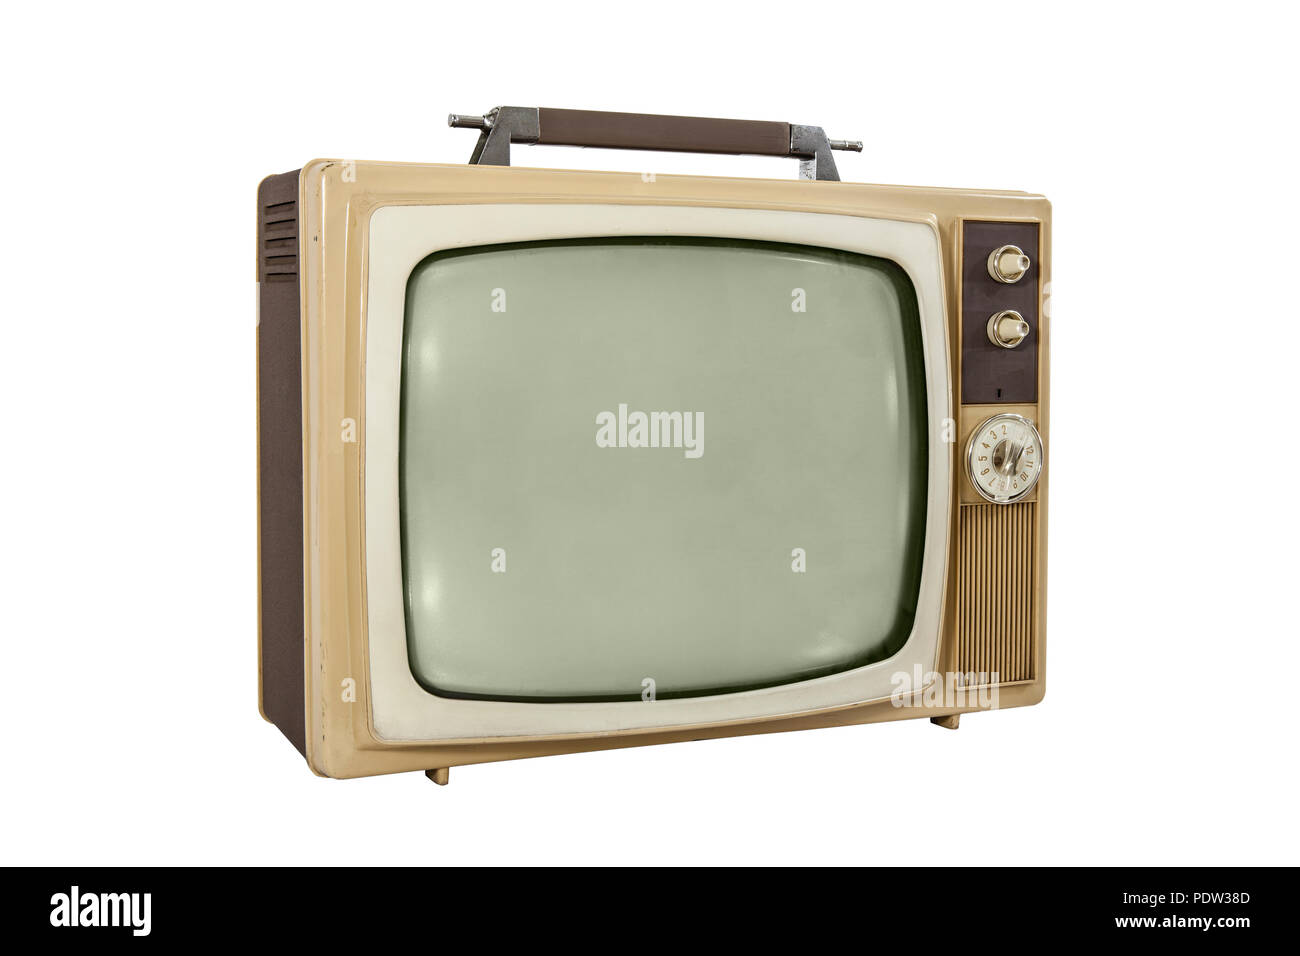 Vintage portable television isolated on white with off screen. Stock Photo